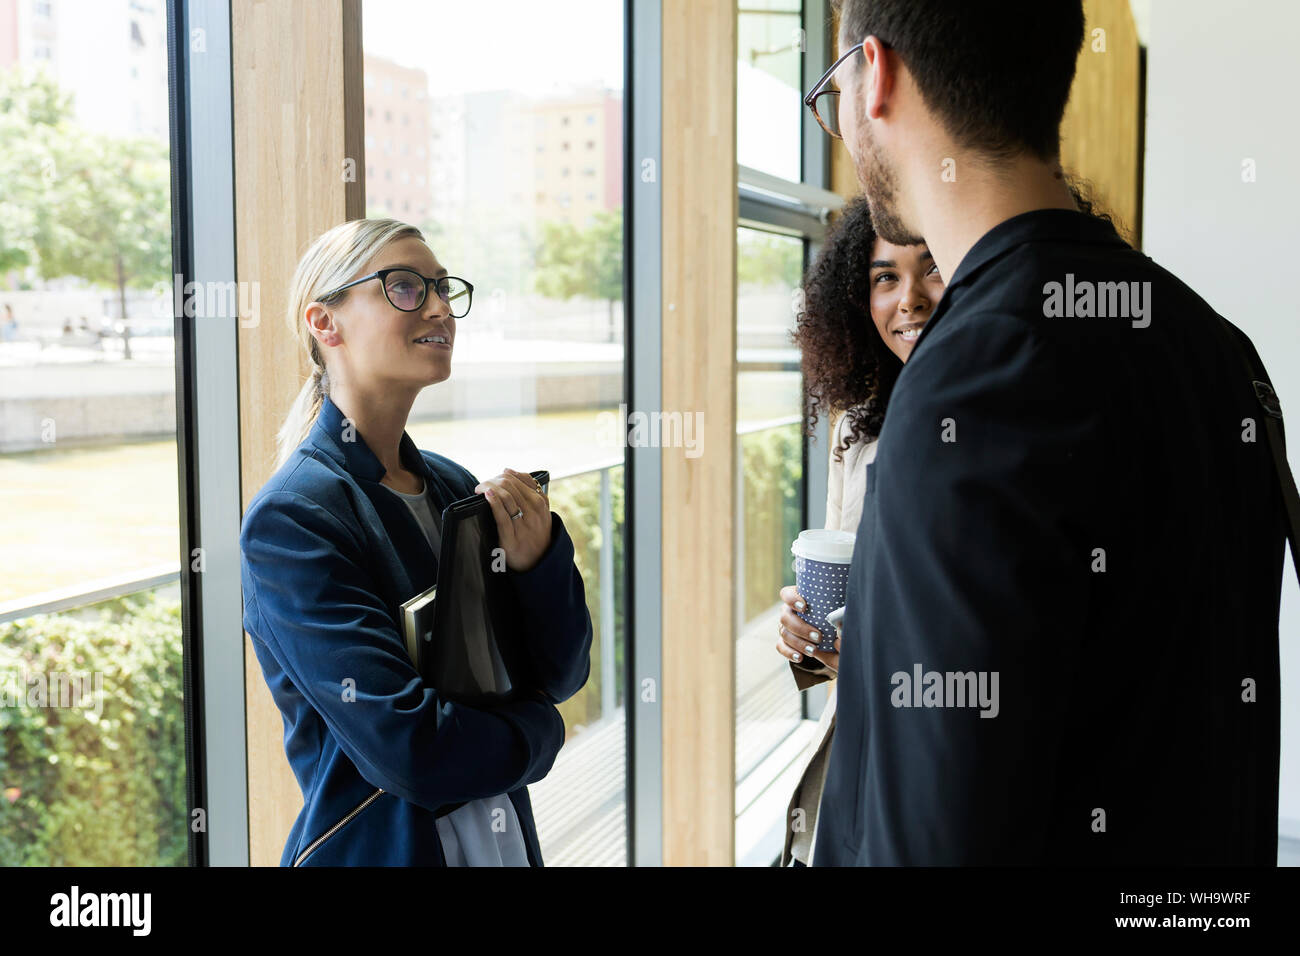 Young business people talking in a hallway Stock Photo